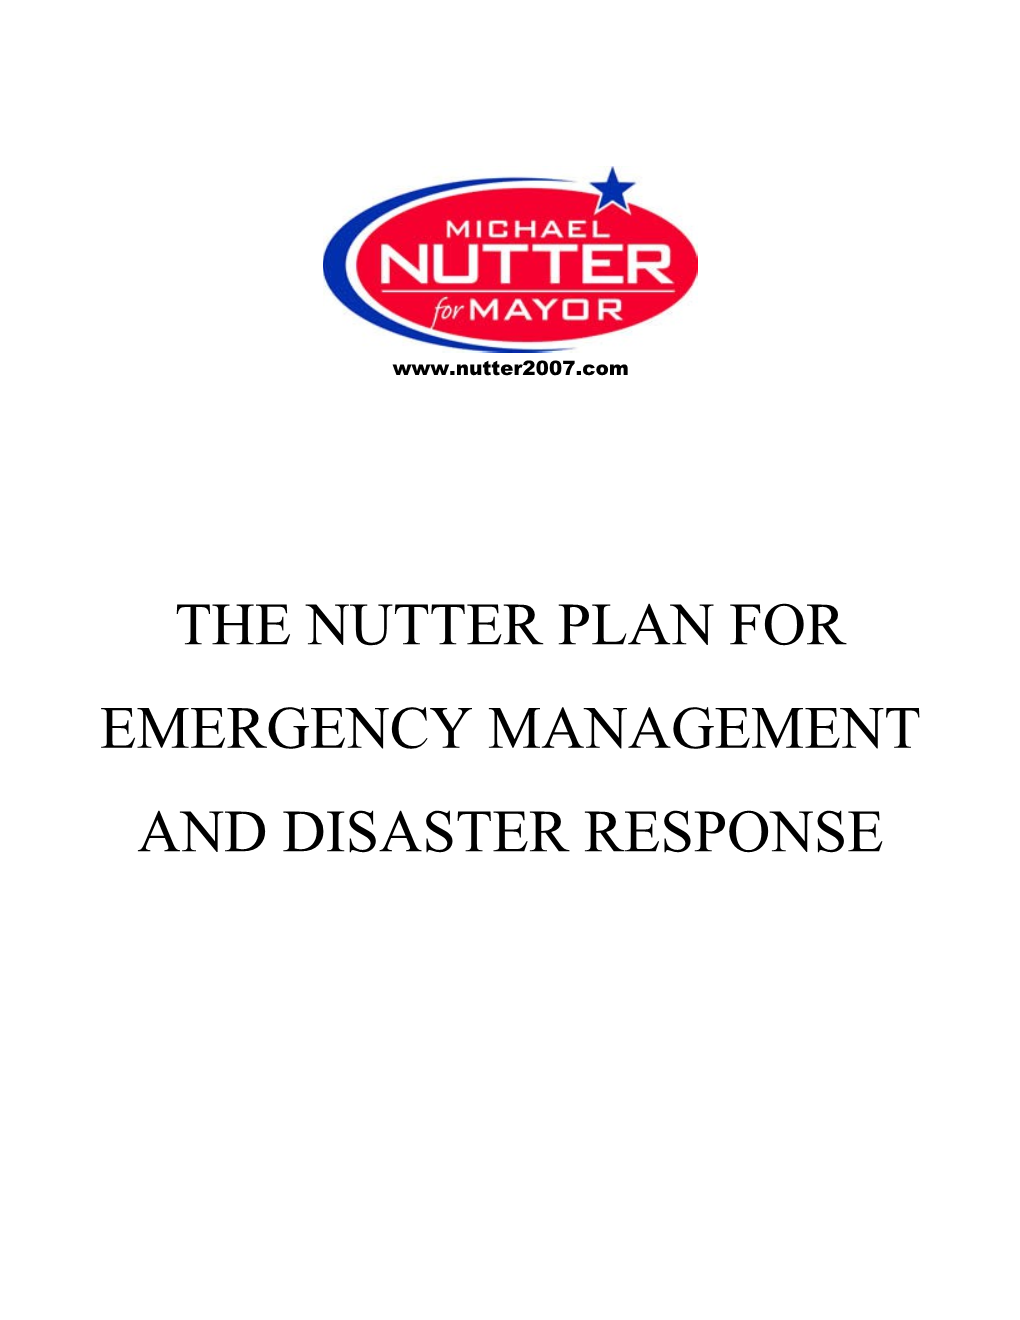 The Nutter Plan for Emergency Management and Disaster Response